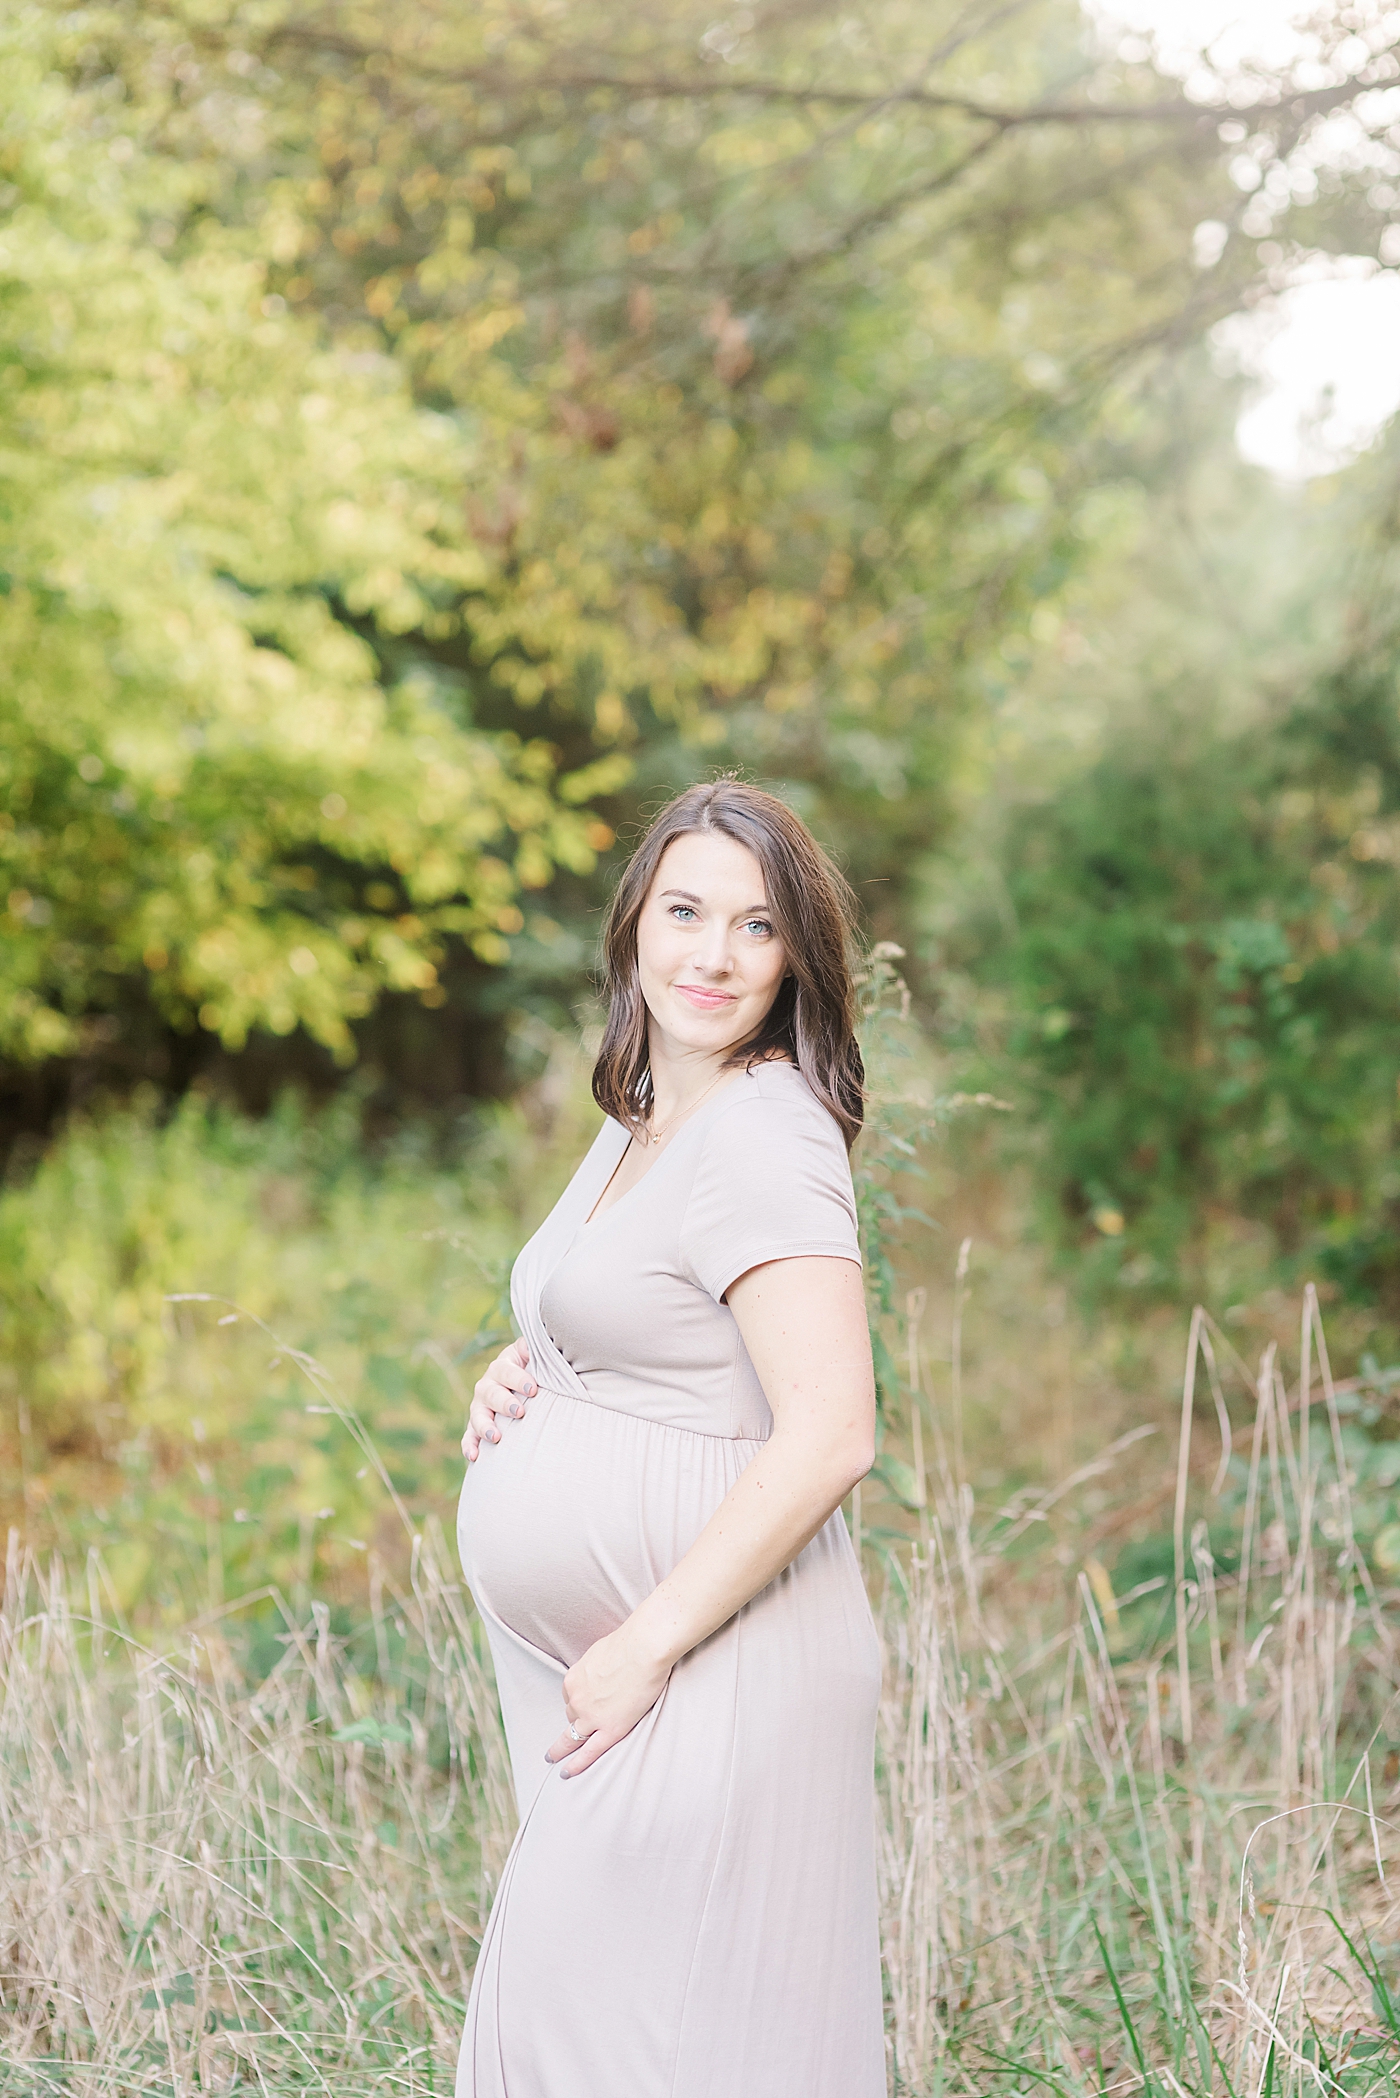 Mom to be in mauve dress | Photo by Davidson Maternity Photographer Anna Wisjo